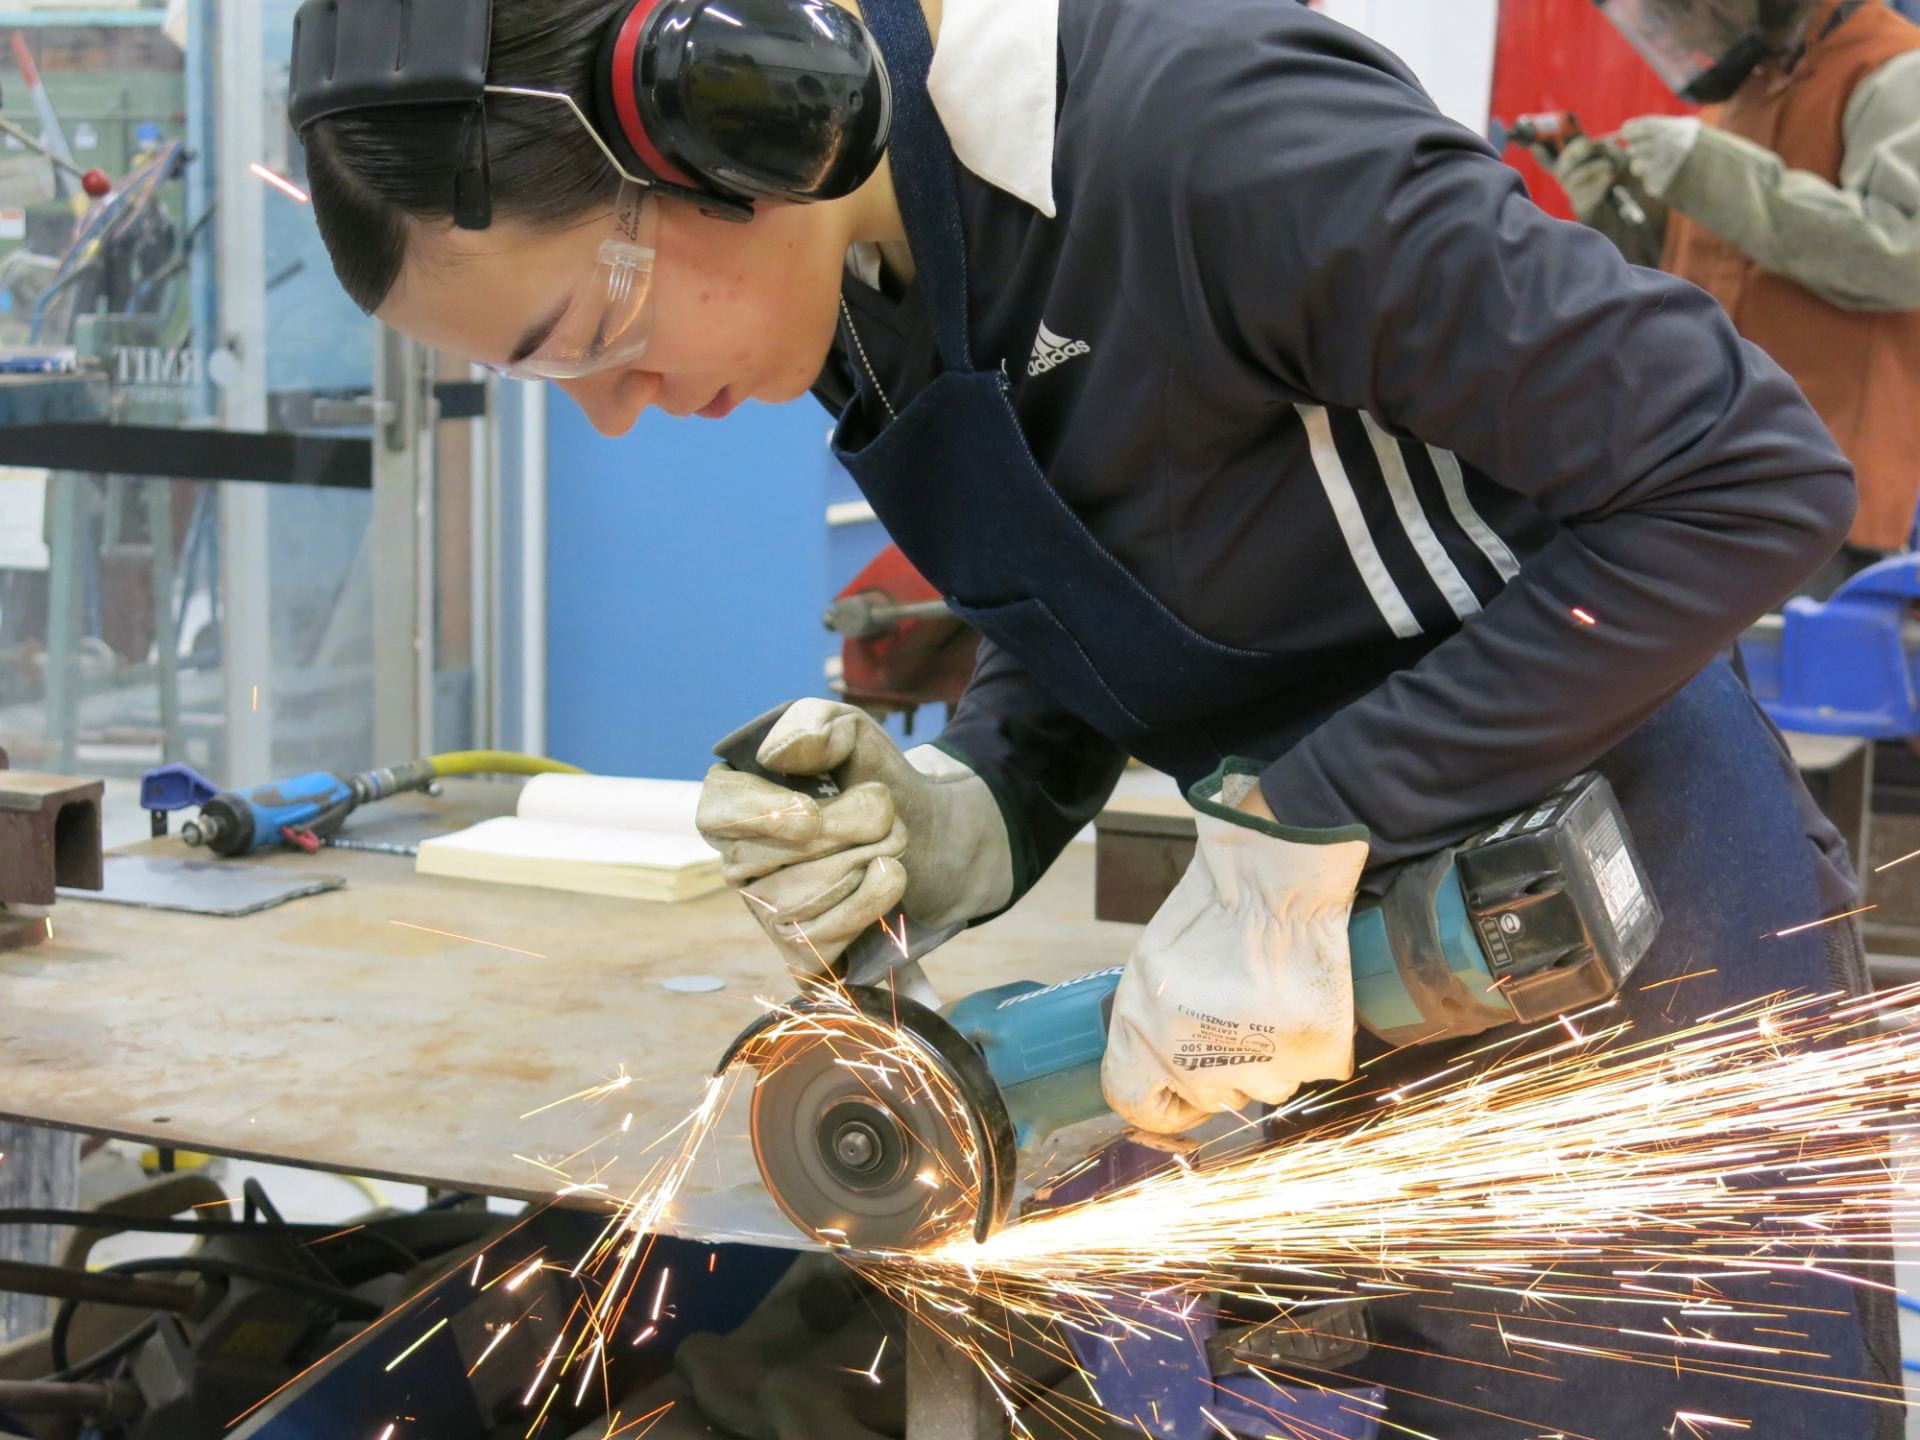 Photograph of Yvonne using the angle grinder in the metal workshop